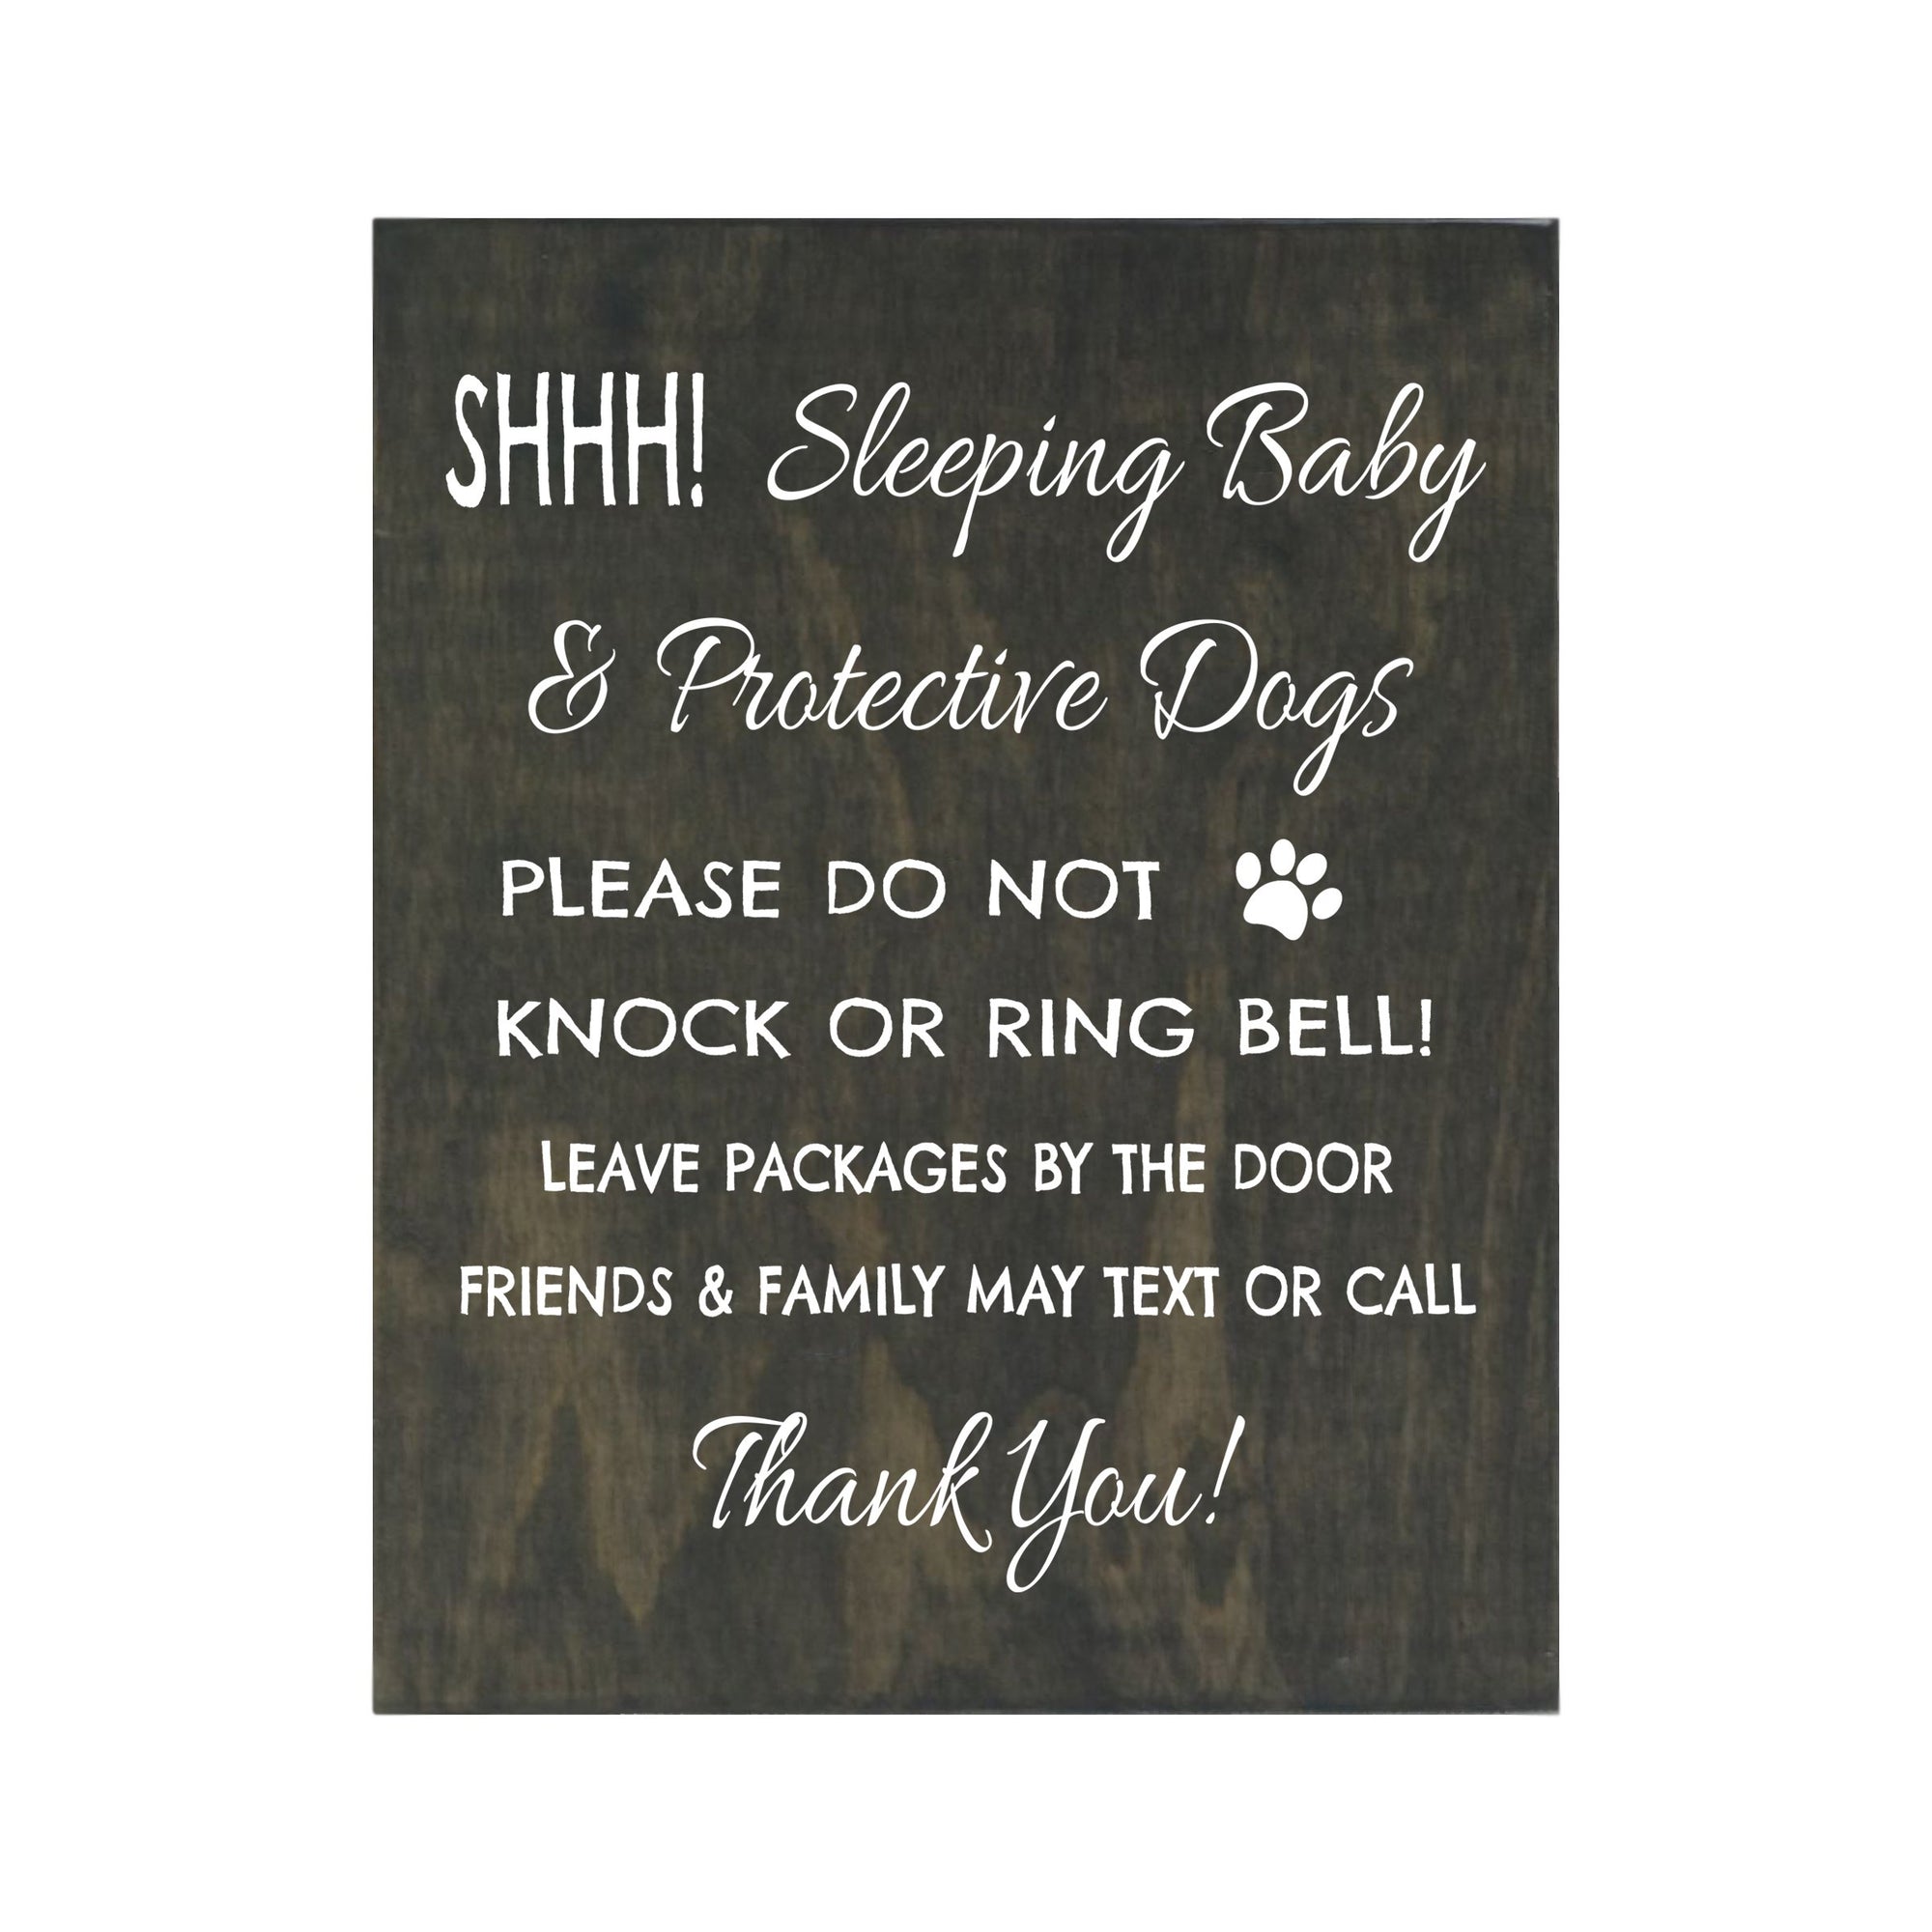 LifeSong Milestones Sleeping Baby Protective Puppies Baltic Birch Sign for Front Door - Do Not Knock or Ring Doorbell - Quiet Entry for House Home Decor - 8x10